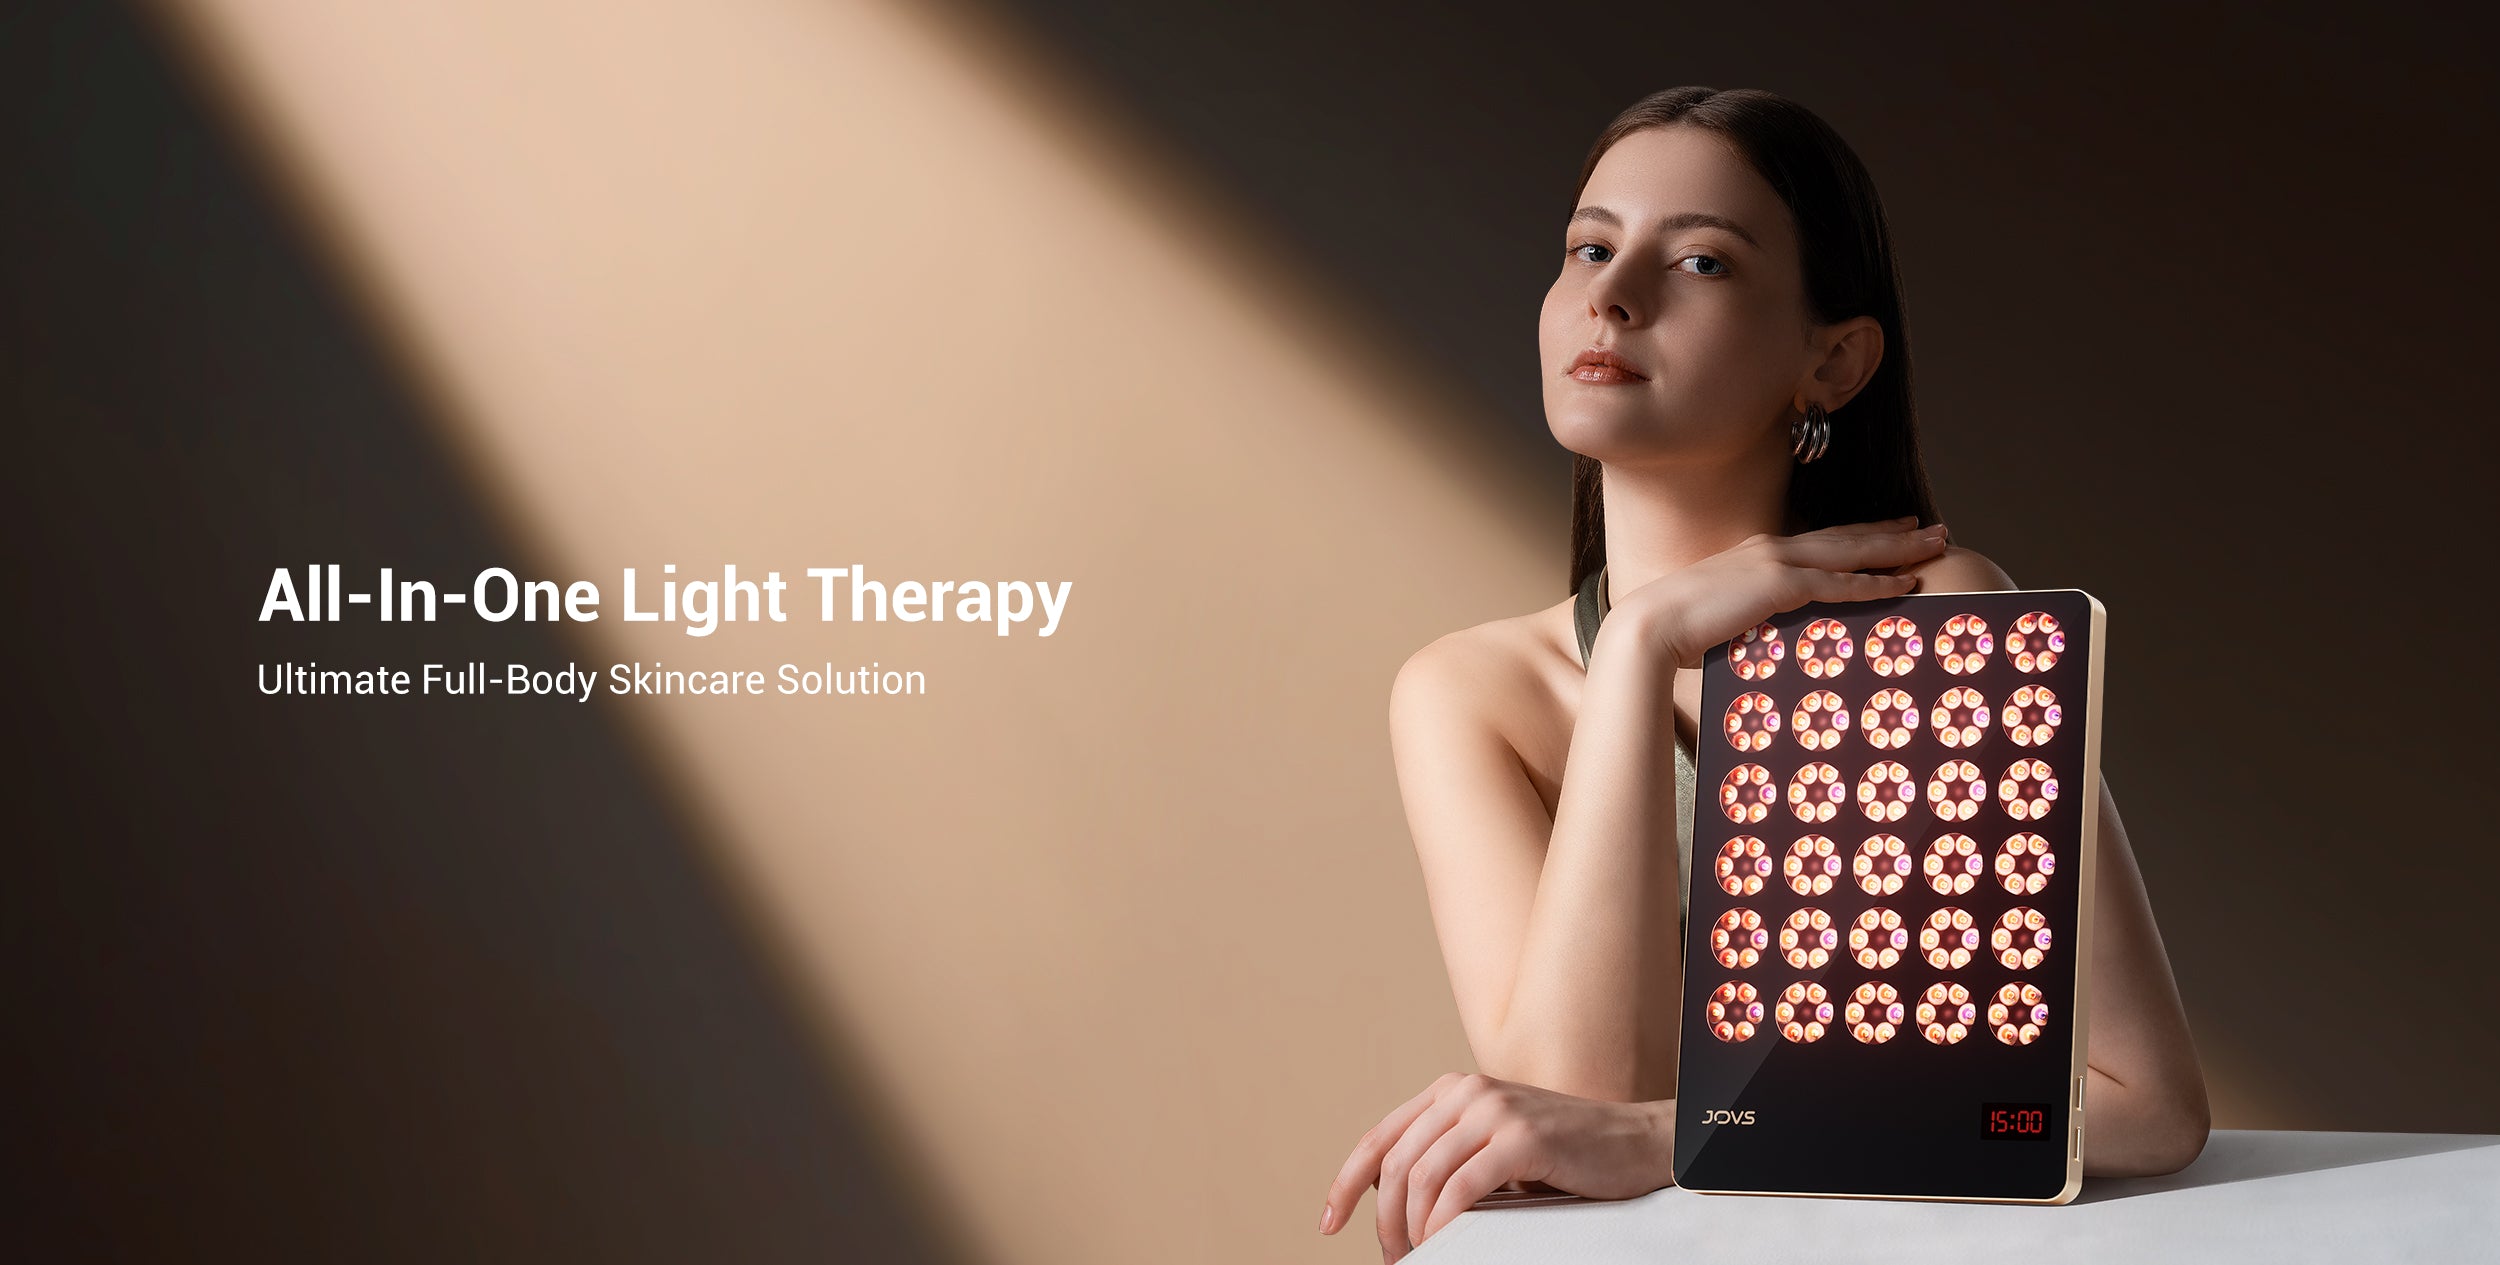 Elegant model presenting All-In-One JOVS Light Therapy Device for Full-Body Skincare.